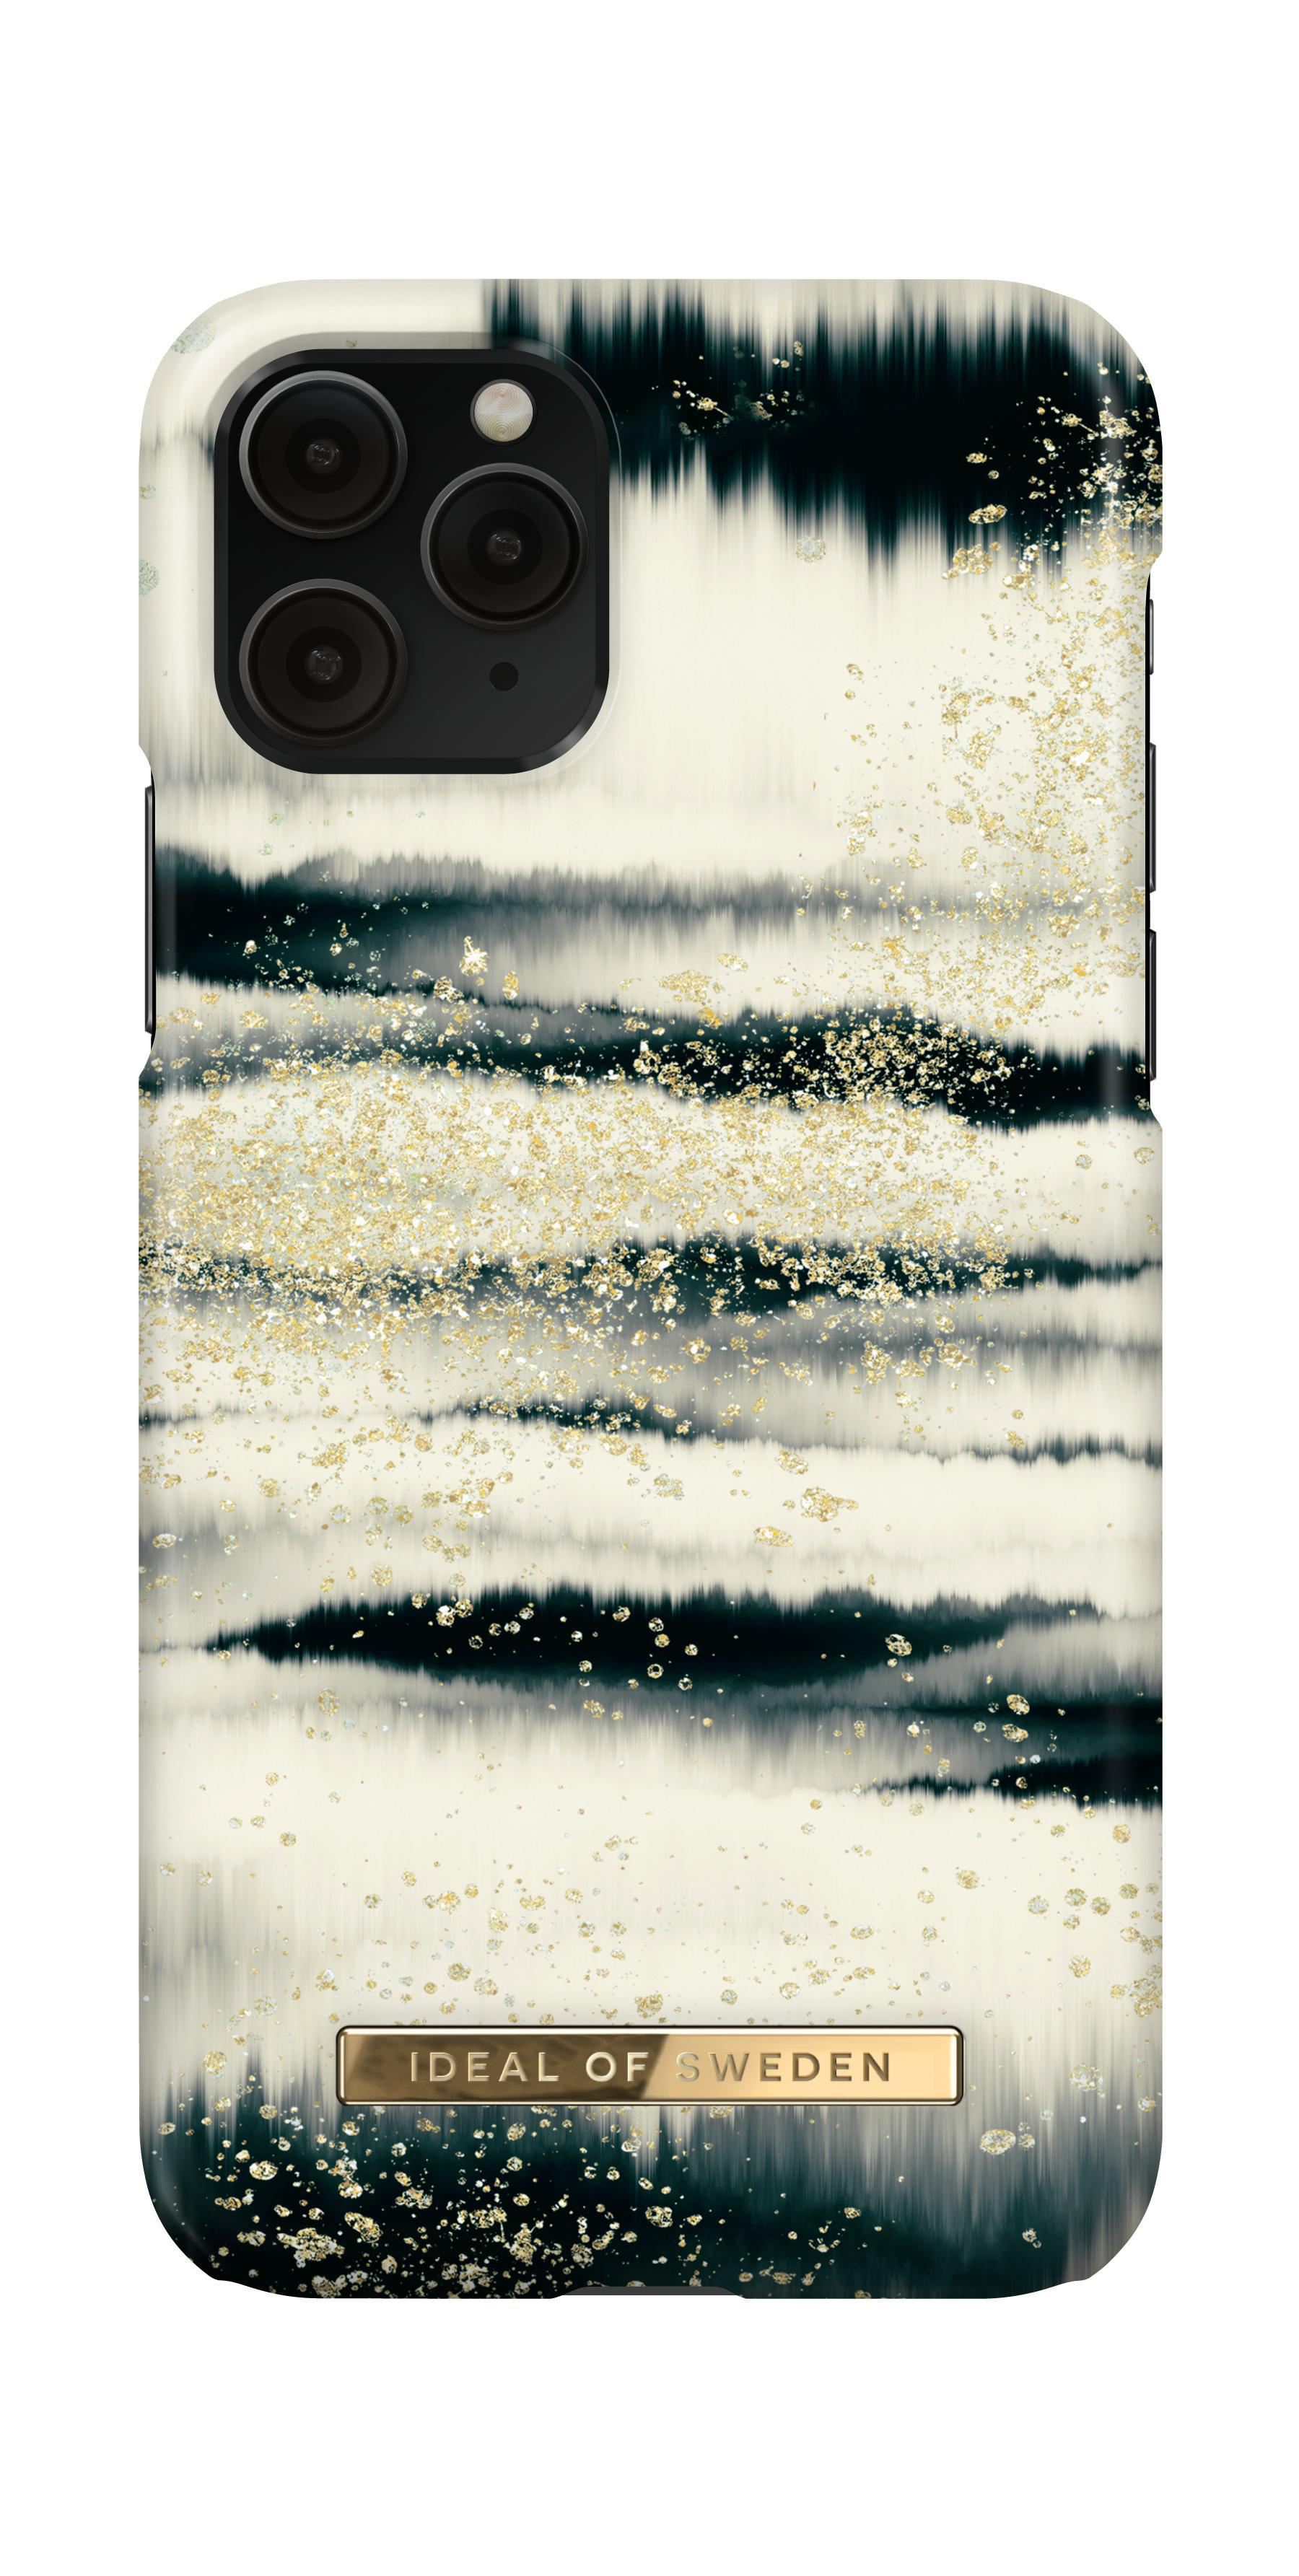 iPhone X, Black/Gold Apple, XS, Fashion, OF 11 Backcover, SWEDEN iPhone iPhone IDEAL Pro,